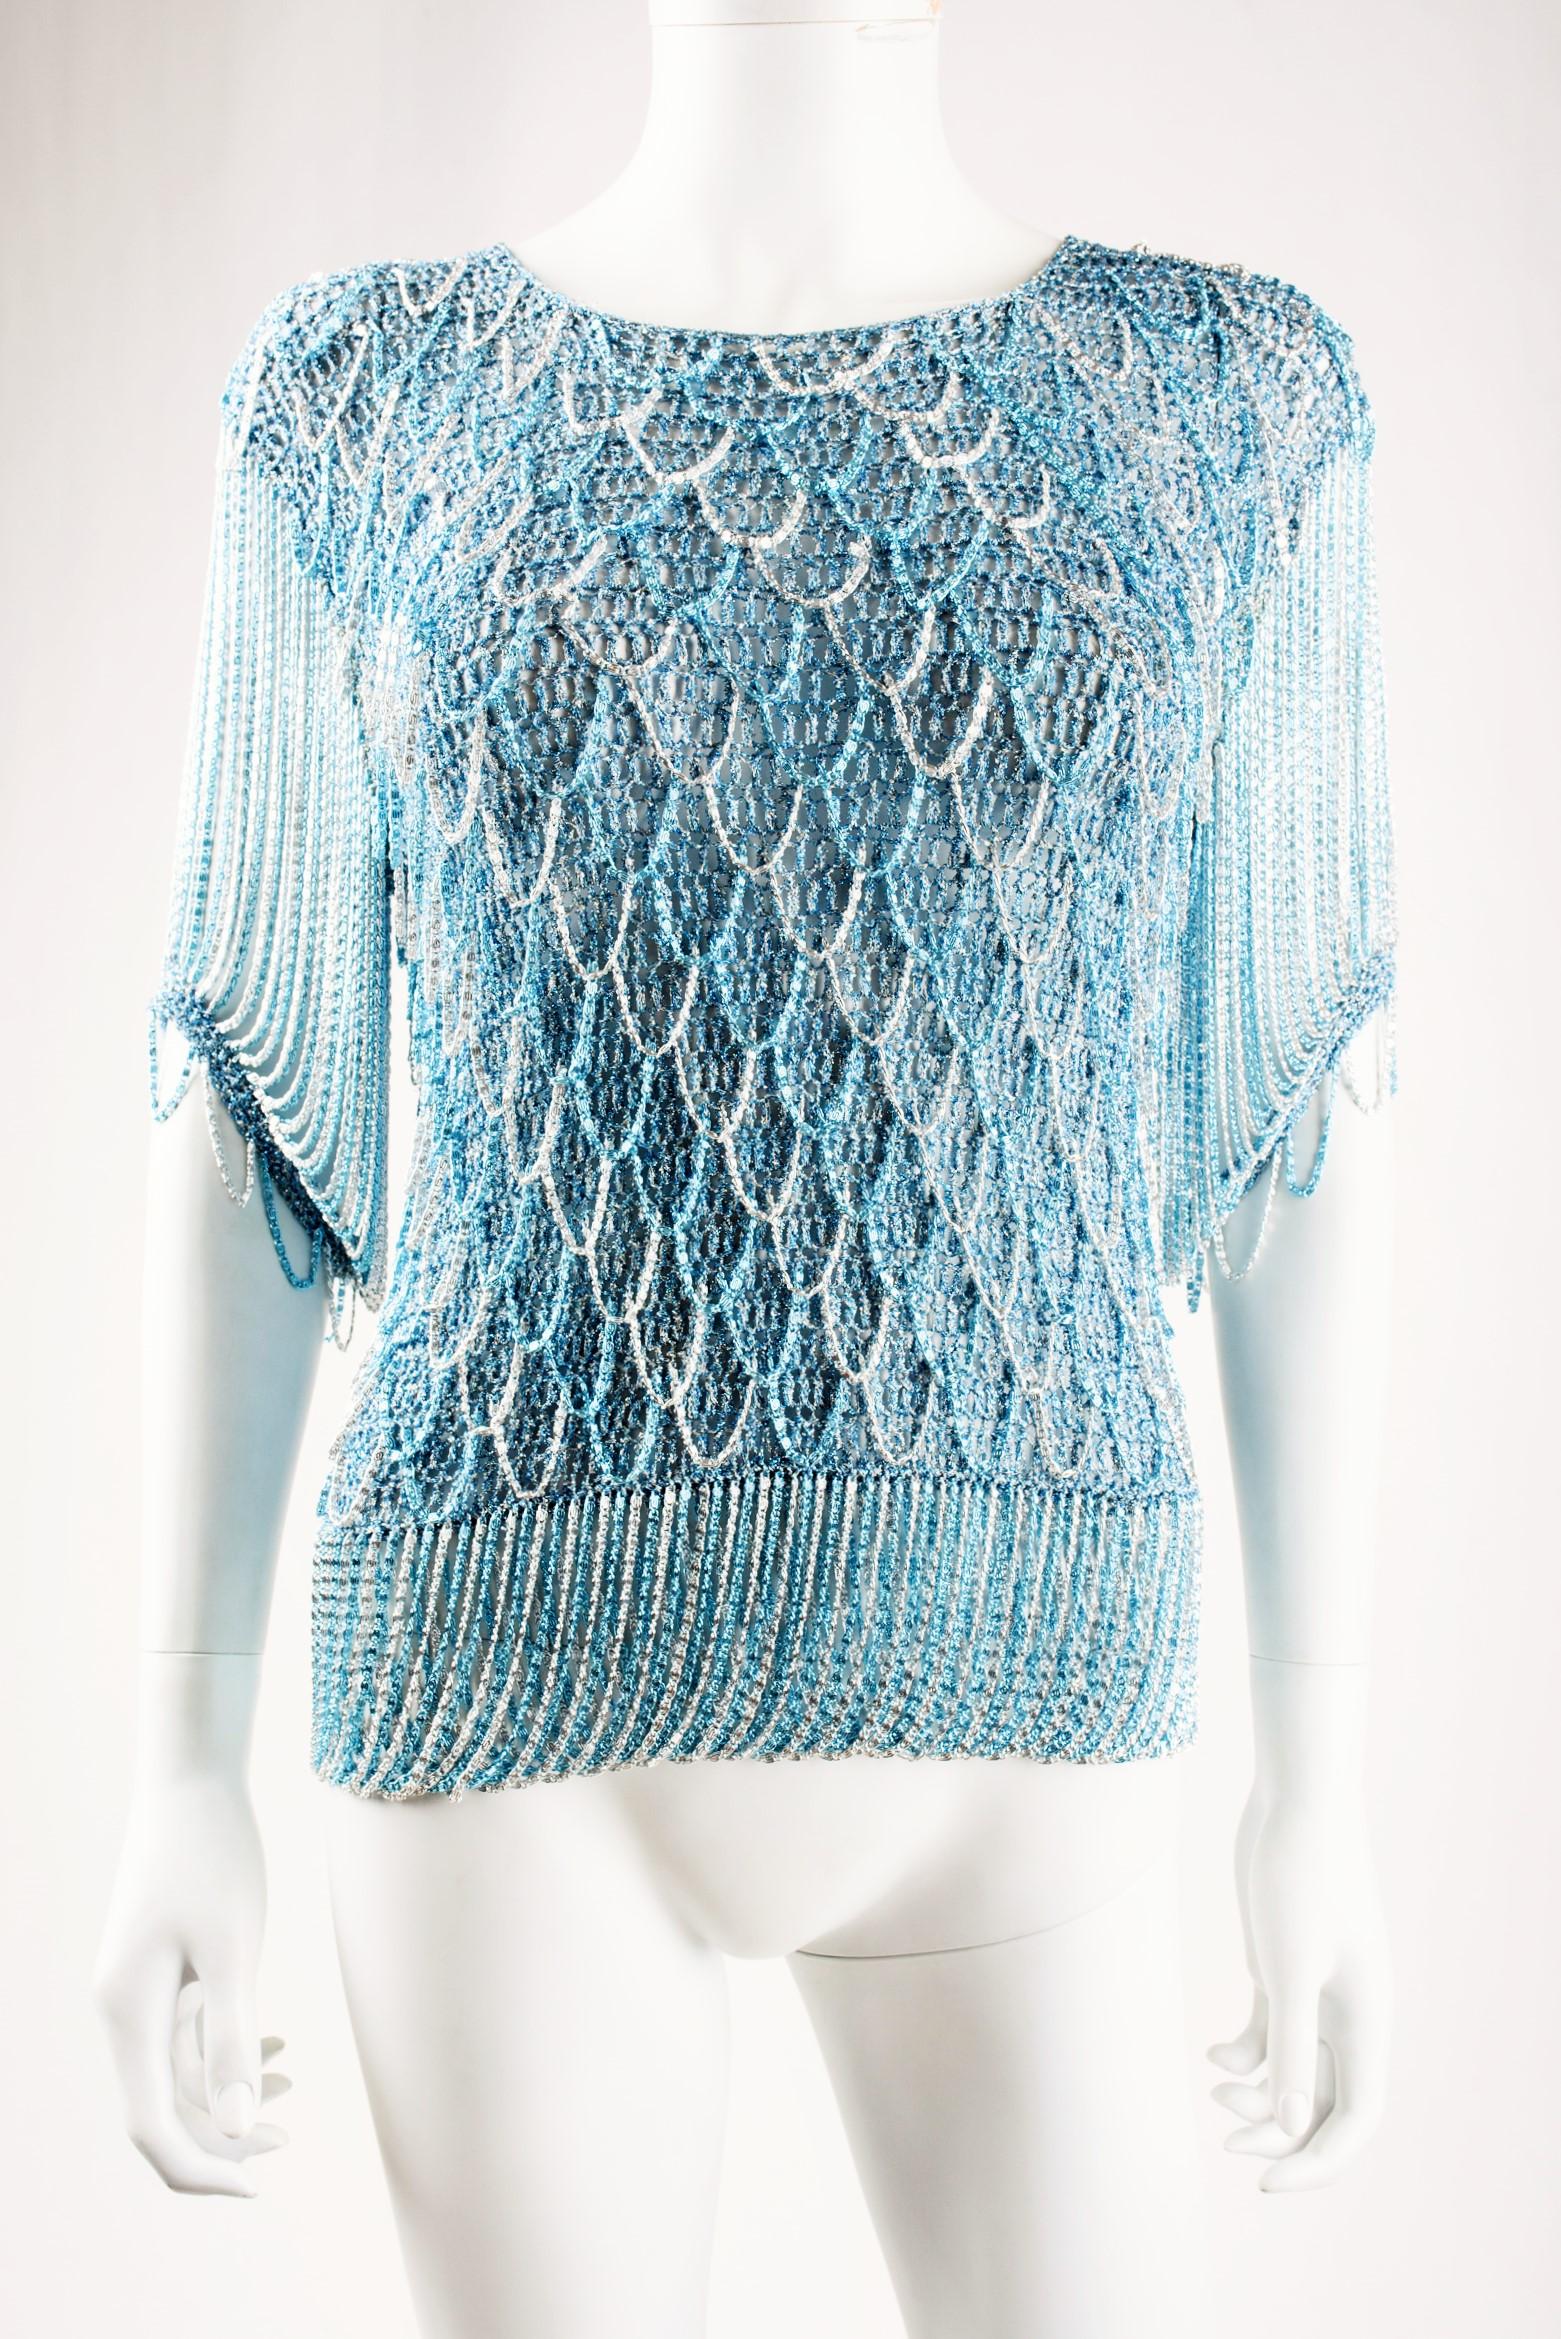 Blue A Loris Azzaro Couture Top in Lurex and silver chains - French Circa 1970 For Sale